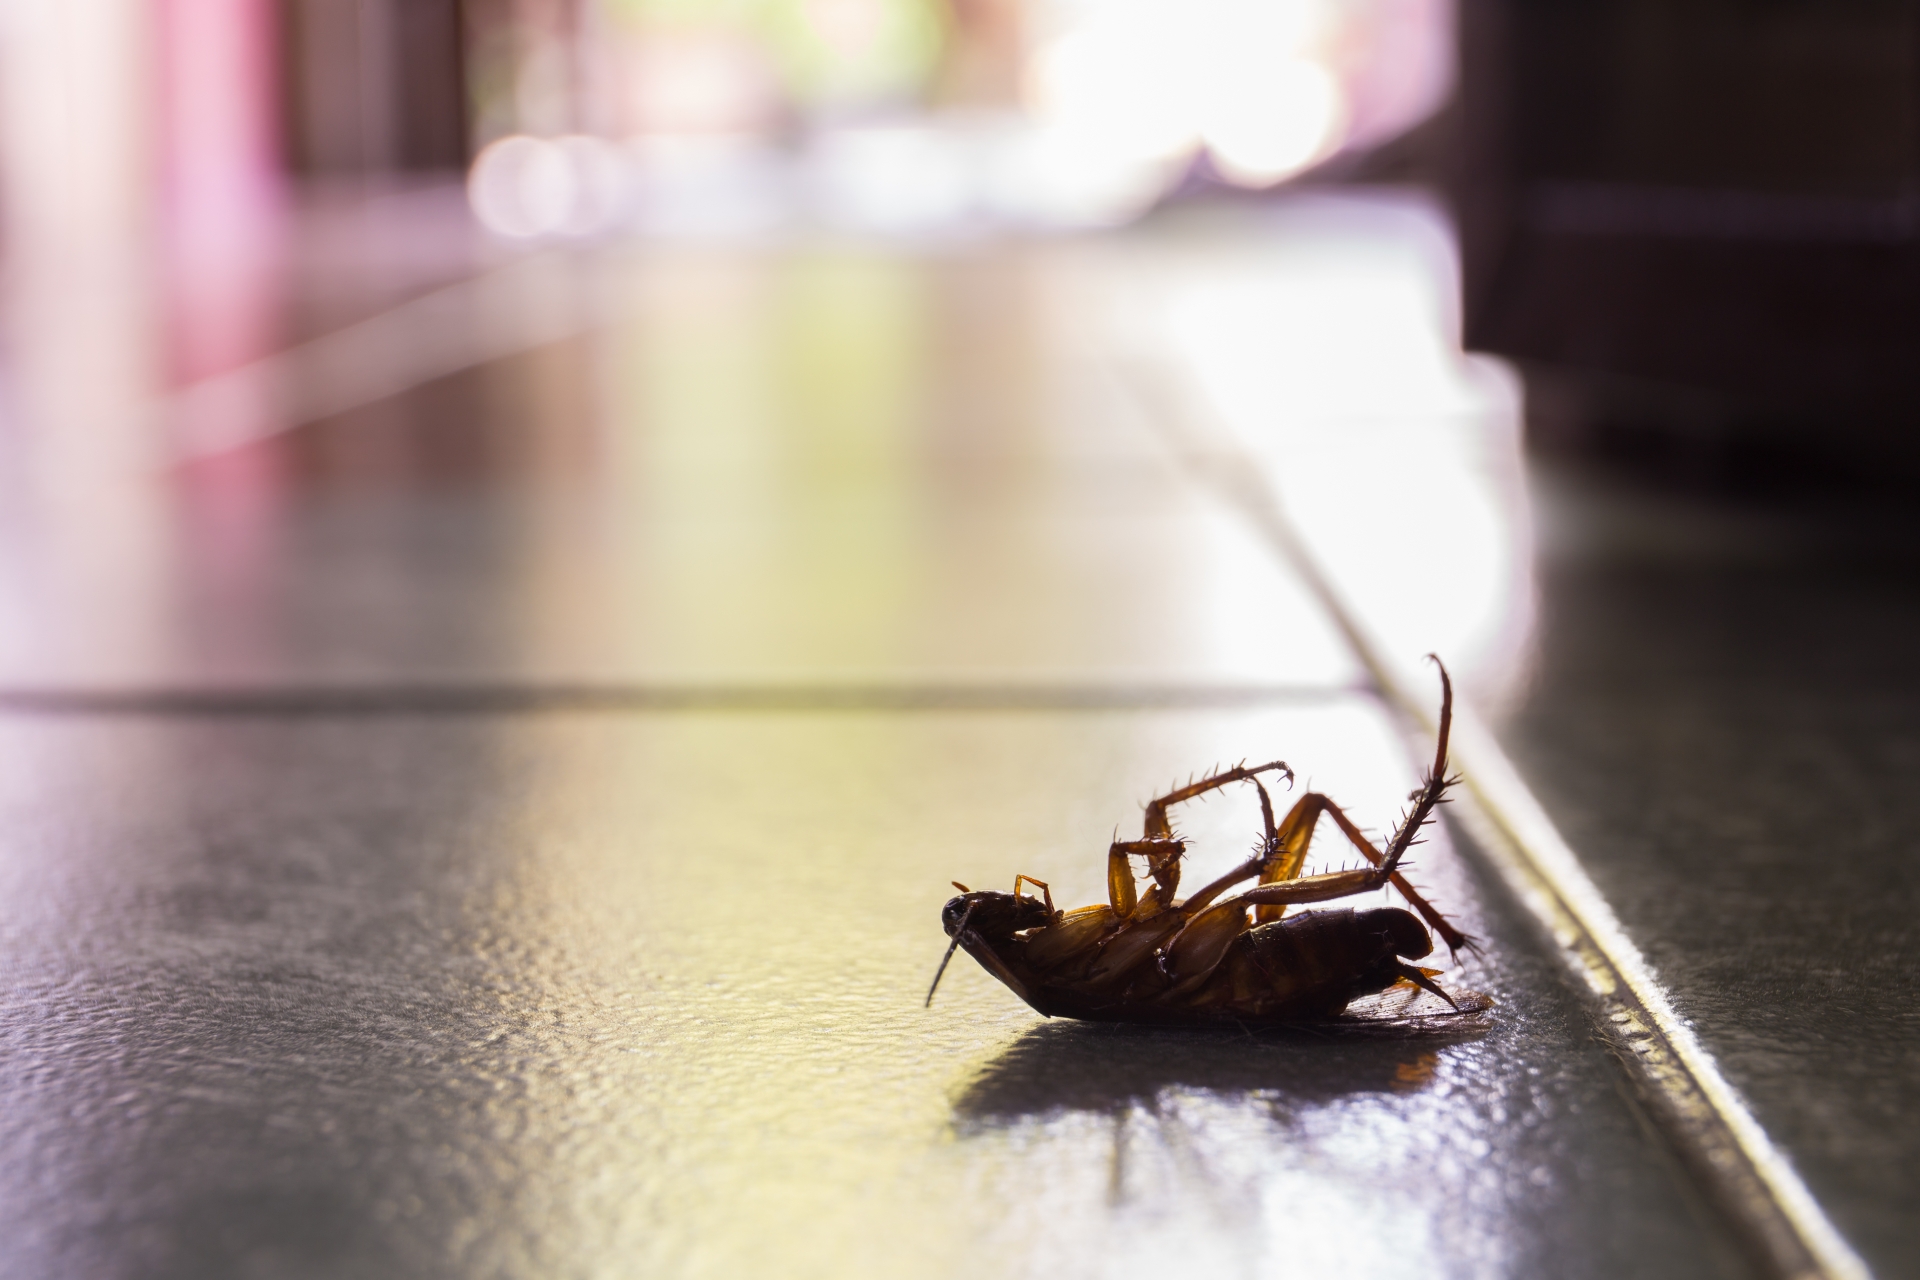 Cockroach Control, Pest Control in Yeading, UB4. Call Now 020 8166 9746